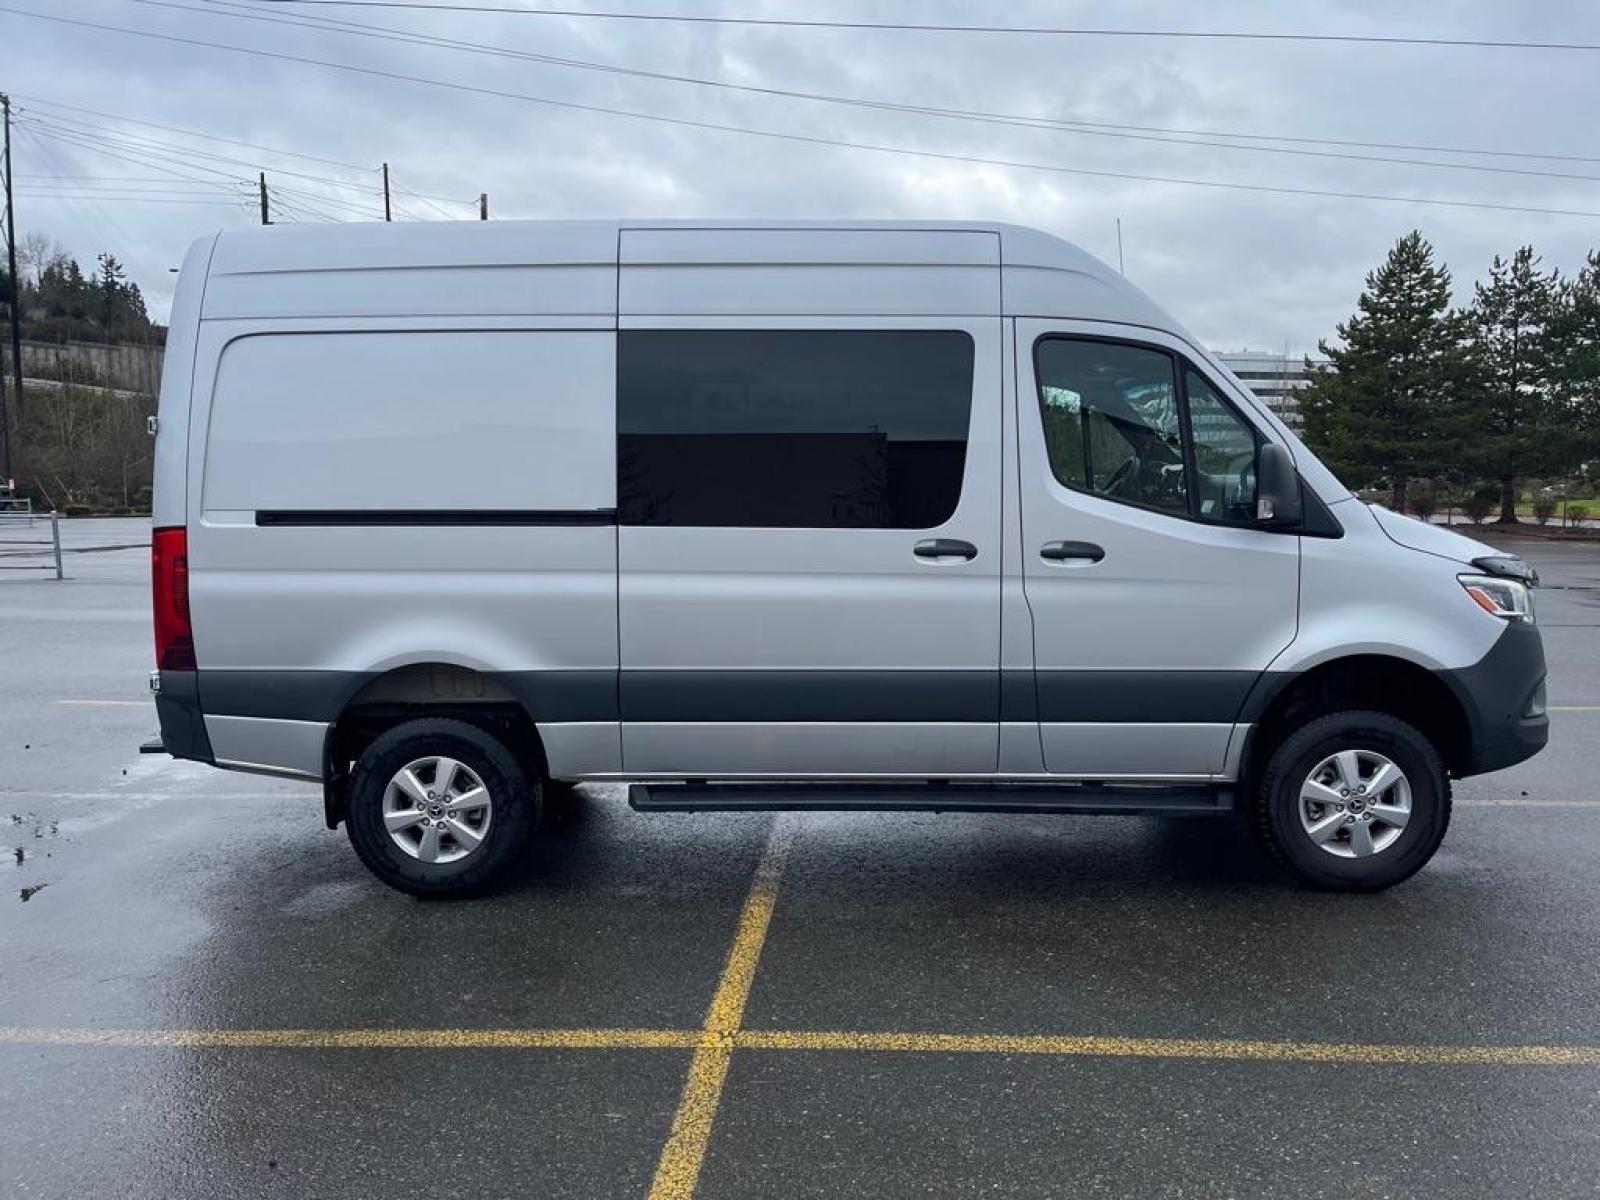 2021 IRIDIUM SILVER METALLIC /GRAY MERCEDES-BENZ SPRINTER CREW 2500 HIGH ROOF V6 144''WB, 4WD (W1W4EBVY9MT) with an 3.0L engine, Automatic transmission, located at 1505 S 356th St., Federal Way, WA, 98003, 47.282051, -122.314781 - THIS IS A HIGH ROOF MODEL!!!!!!! Standing height is 6'3'' inside. One Owner-CUSTOM BUILT FOR ONLY $89,999! You will not find a 4x4 TURBODIESEL V6, with a HIGH ROOF model like this with TOW and DRIVER ASSIST PACKAGES. Customization includes: Parking Package with 360 SURROUND-VIEW CAMER - Photo #5